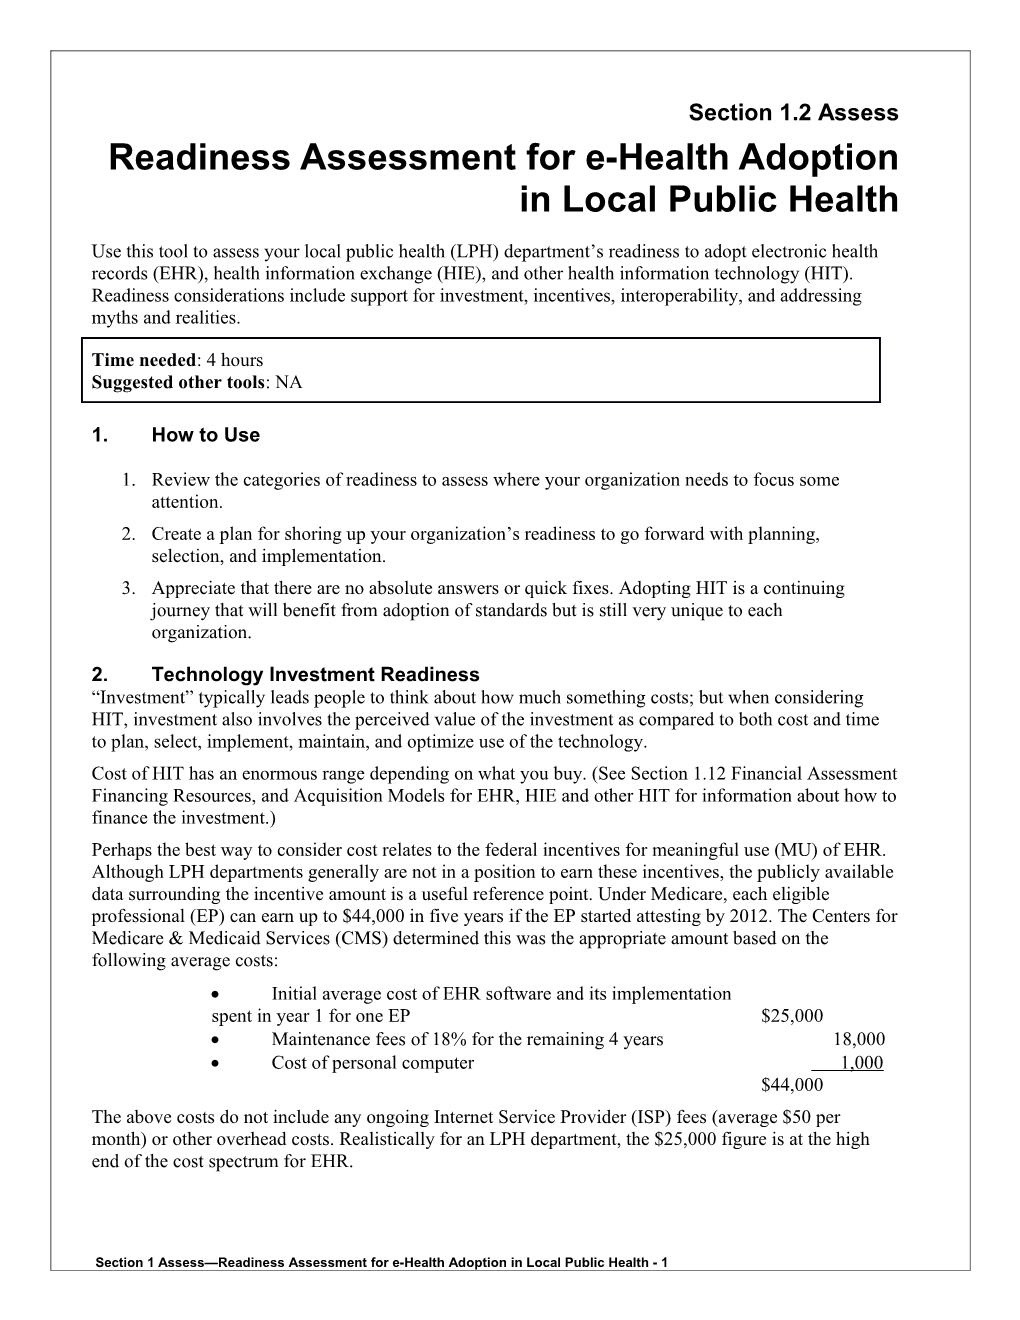 1 Readiness Assessment for Ehealth Adoption in Local Public Health